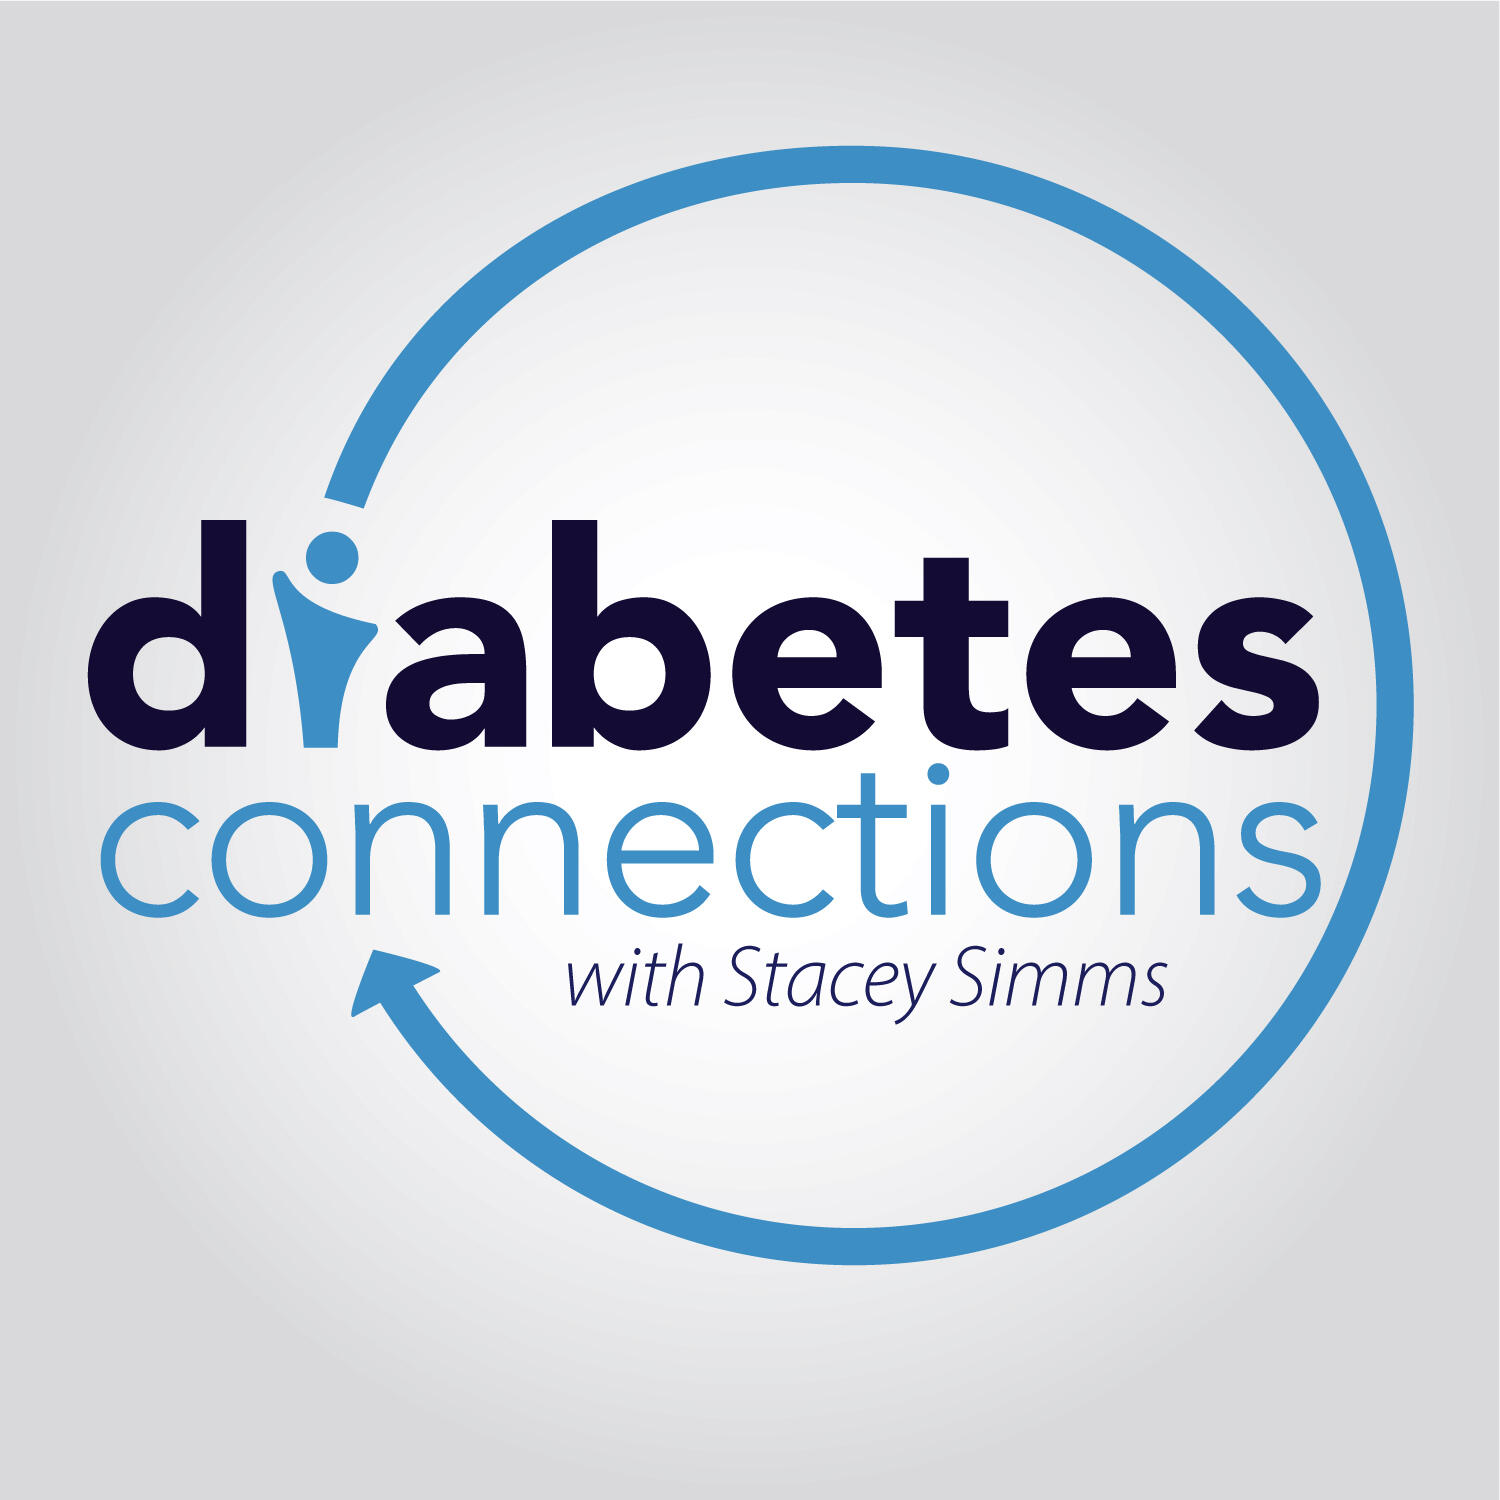 Diabetes Connections - The Group